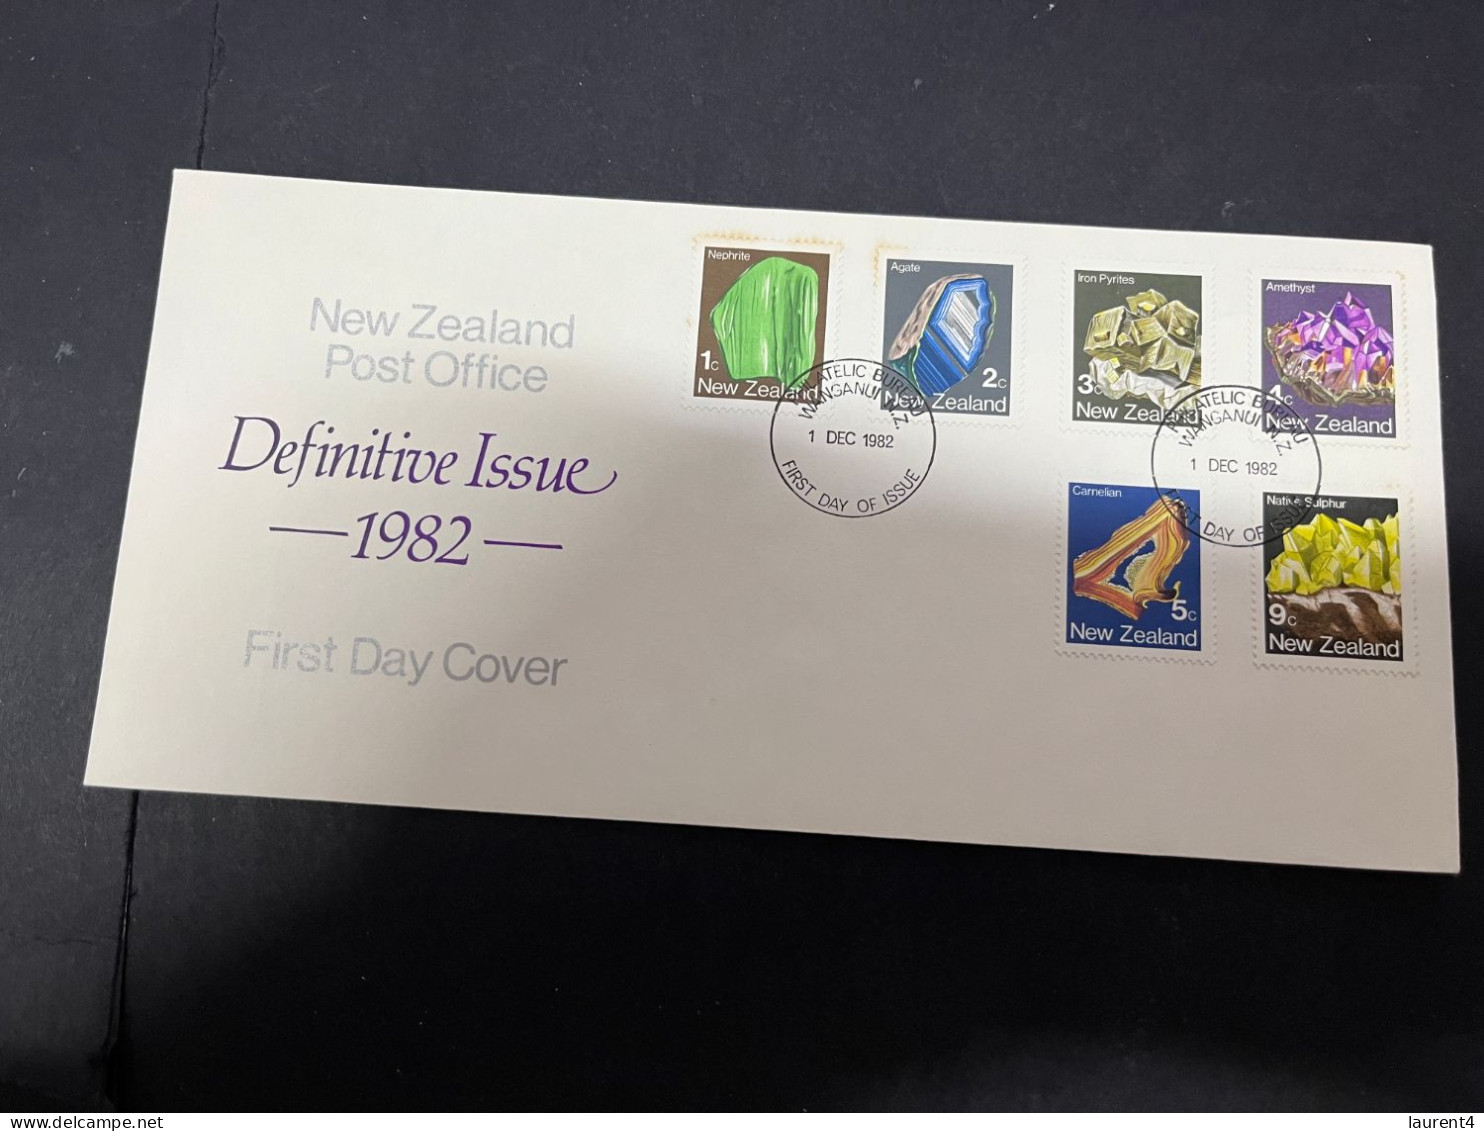 1-5-2024 (3 Z 32) FDC New Zealand - 1982 - Definitive Stones Issue - FDC